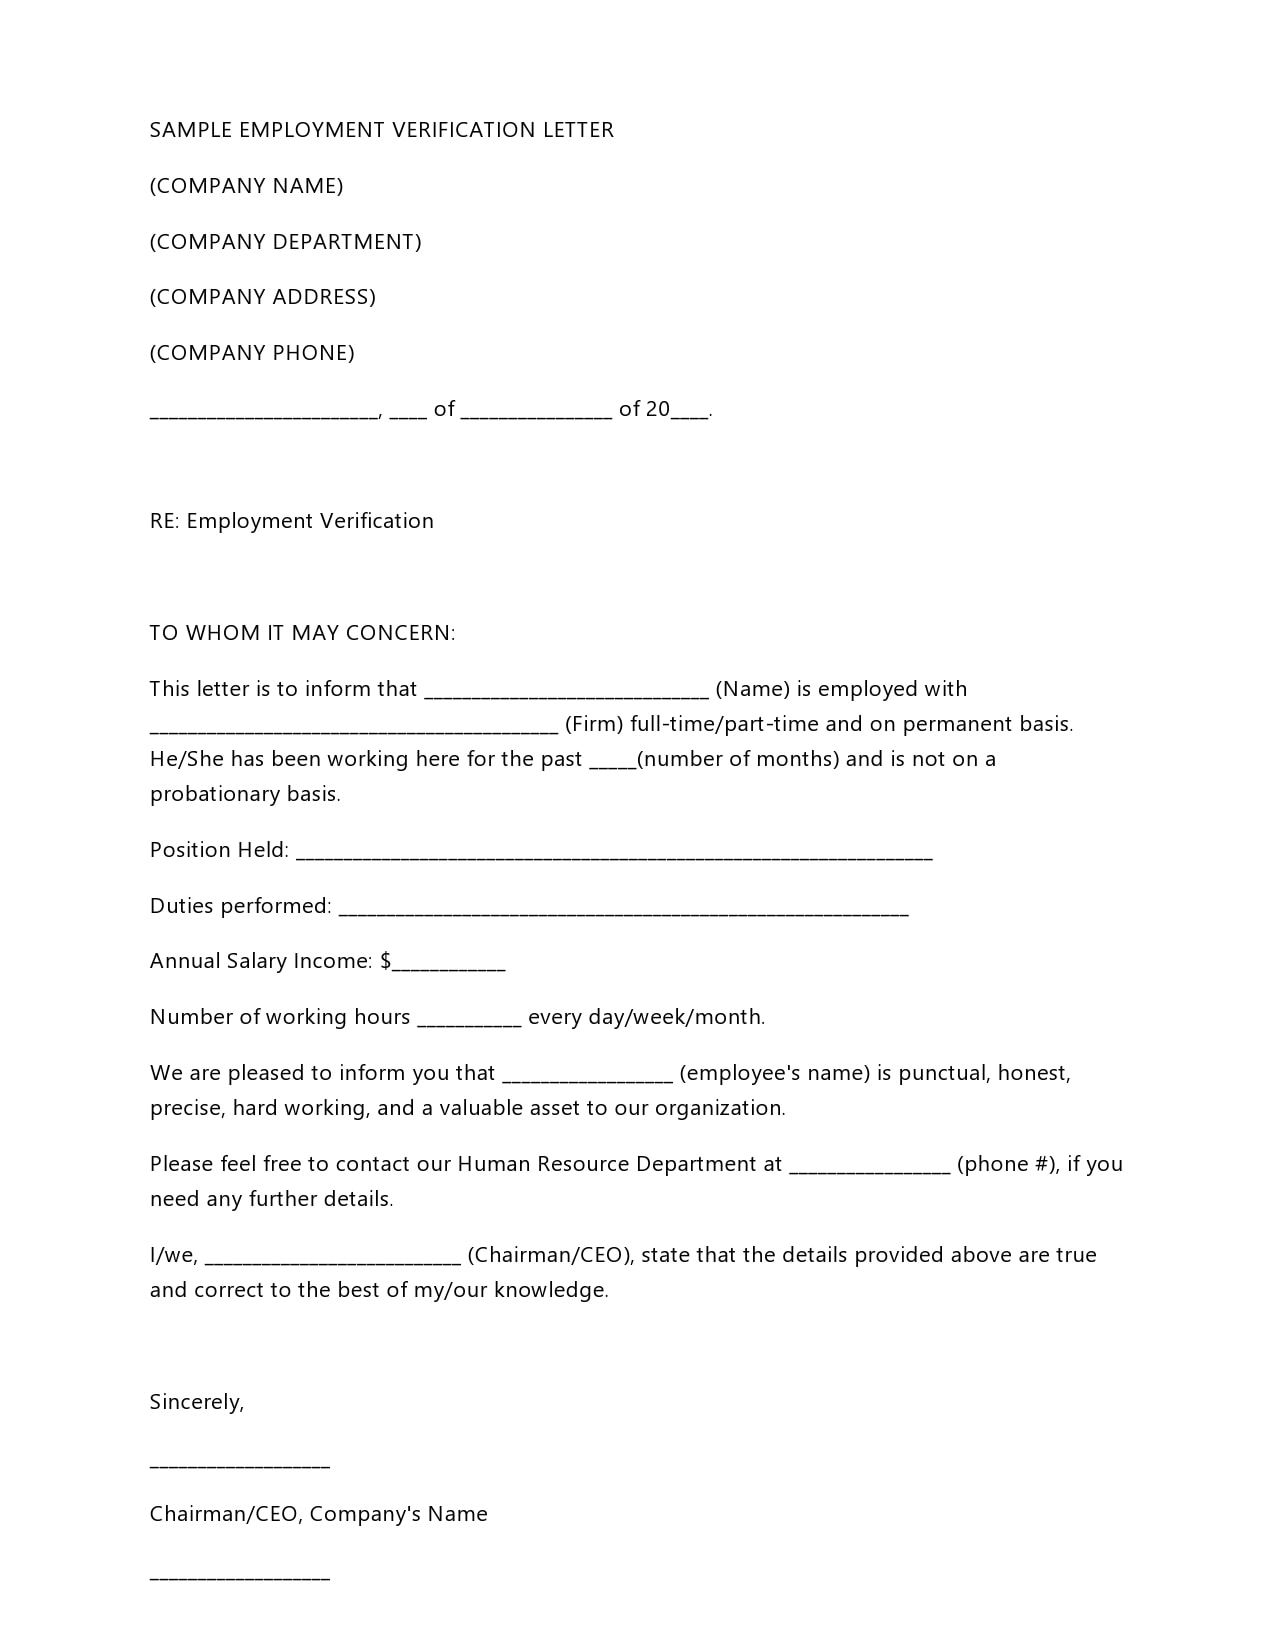 Employment Verification Letter Form from templatearchive.com